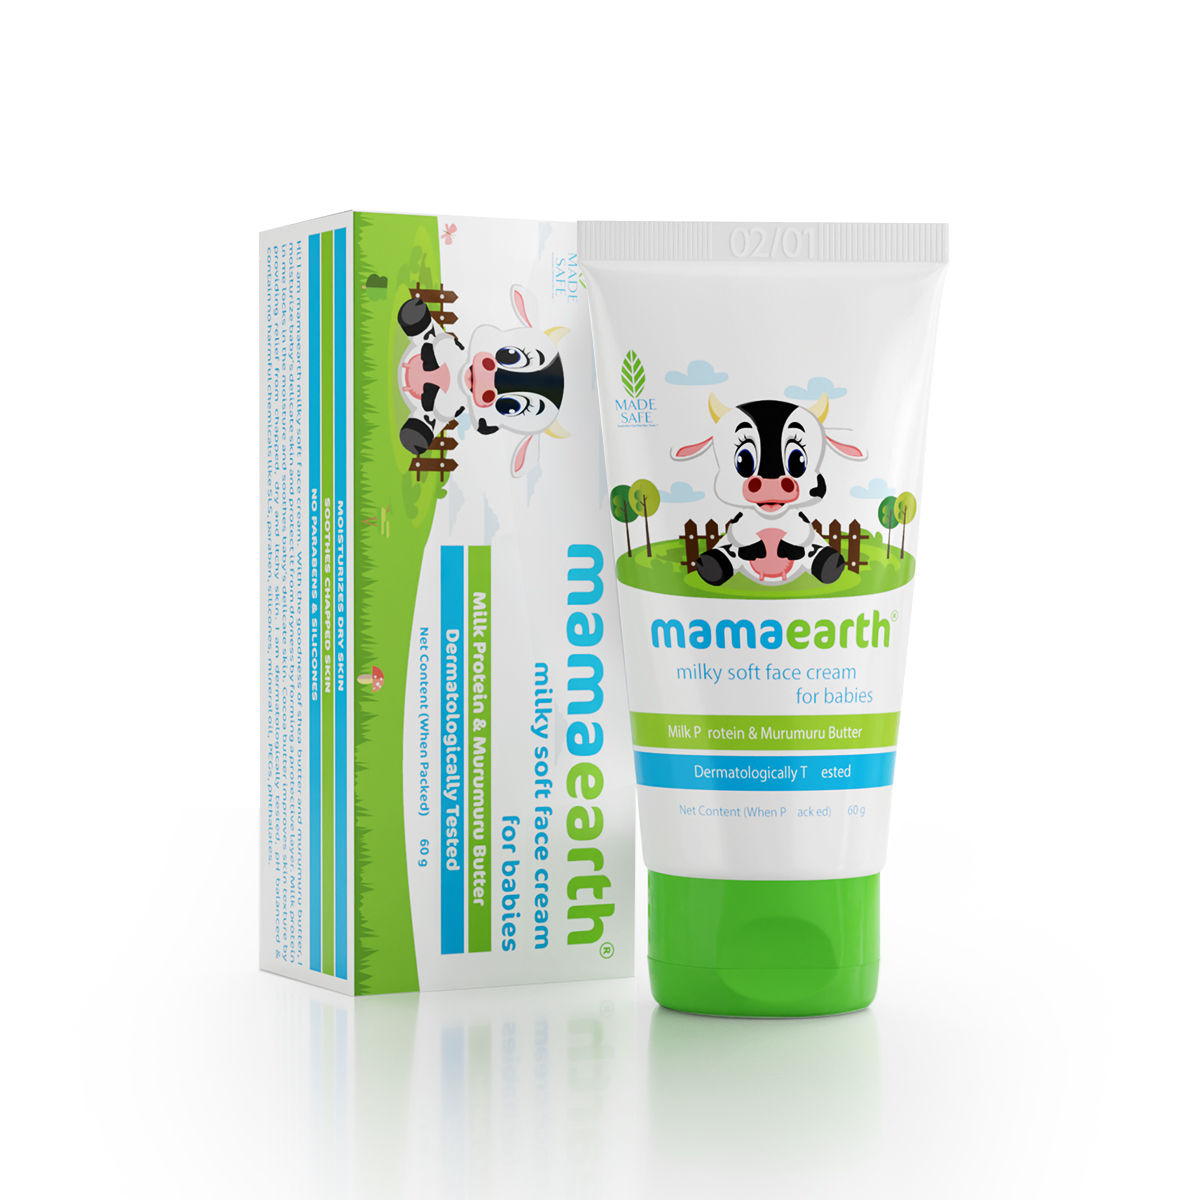 Mamaearth Milky Soft Face Cream for Babies with Milk Protein Murumuru Butter